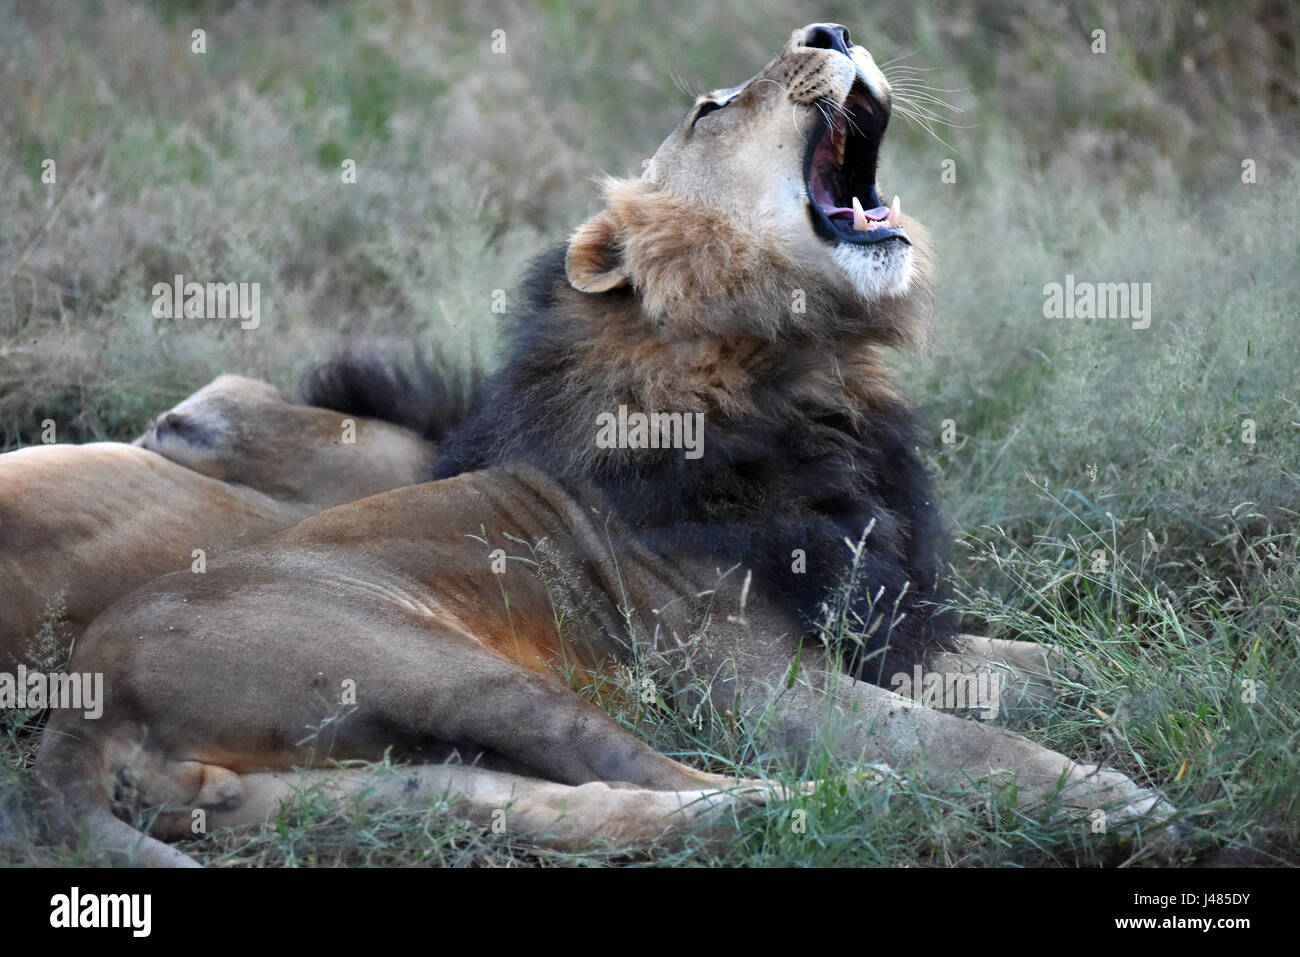 An African lion roars, exposing its jaws in the Harnass Wildlife Foundation in Namibia on 26.03.2017. The African lion is the second largest cat, after the tiger, and  the largest land carnivore in Africa. Its head to tail length can reach up to 2.5 metres, its weight varies between 150 and 250 kilograms. Occasionally they can be even bigger. Males, like the one in this picture have a mane encircling their face, which can reveal the general condition of the animal. The number of lions living in the wild is estimated to be at around 25,000 and 30,000 worldwide. Most of these are in southern Afr Stock Photo